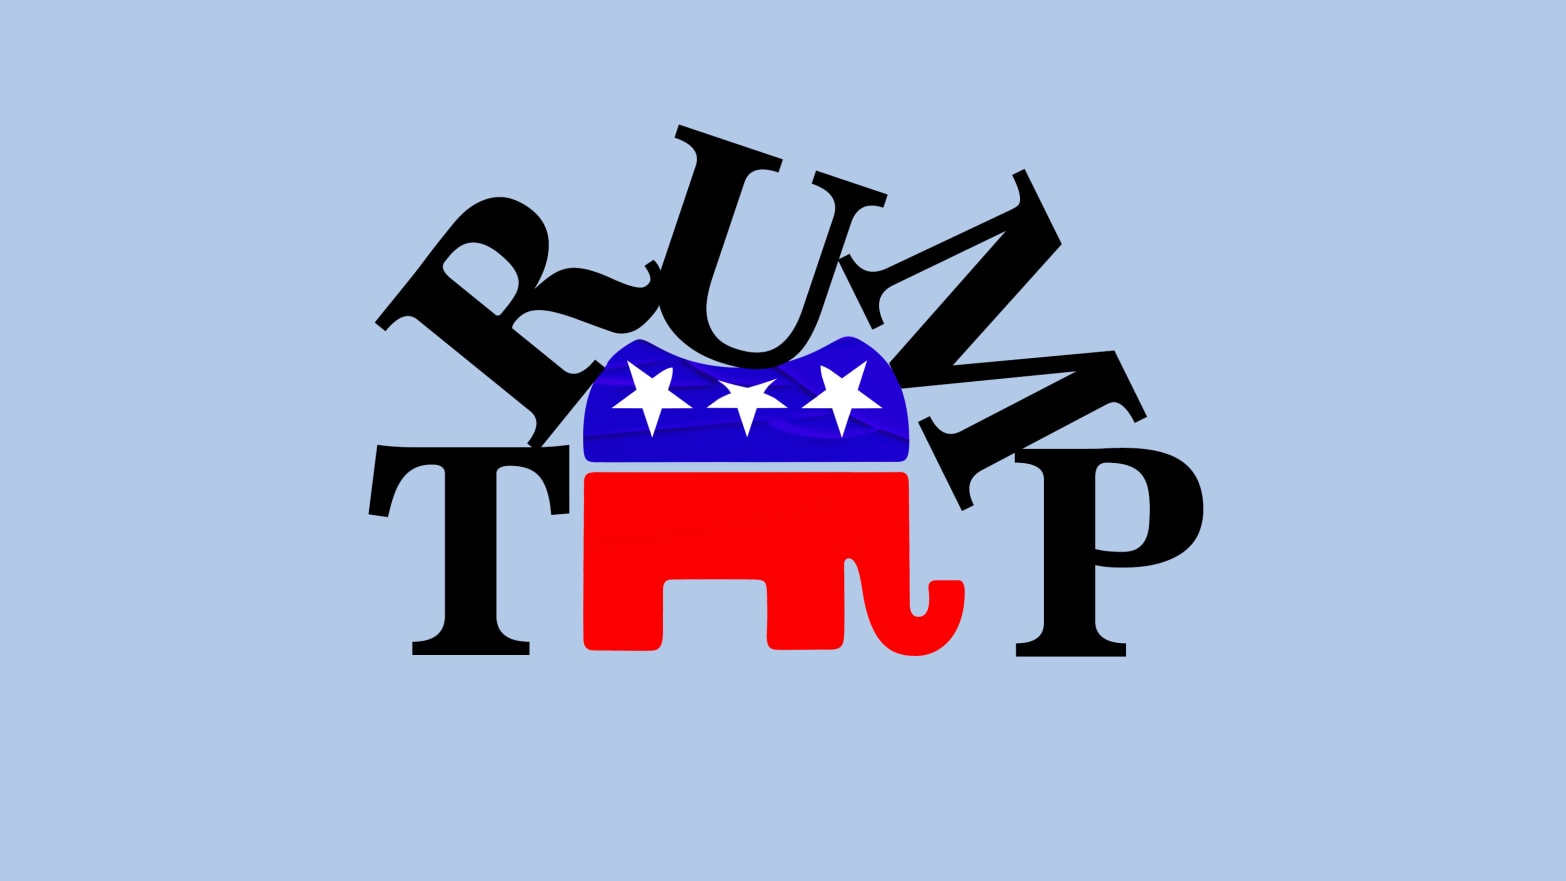 A photo illustration of letters spelling Trump crushing the GOP elephant logo.